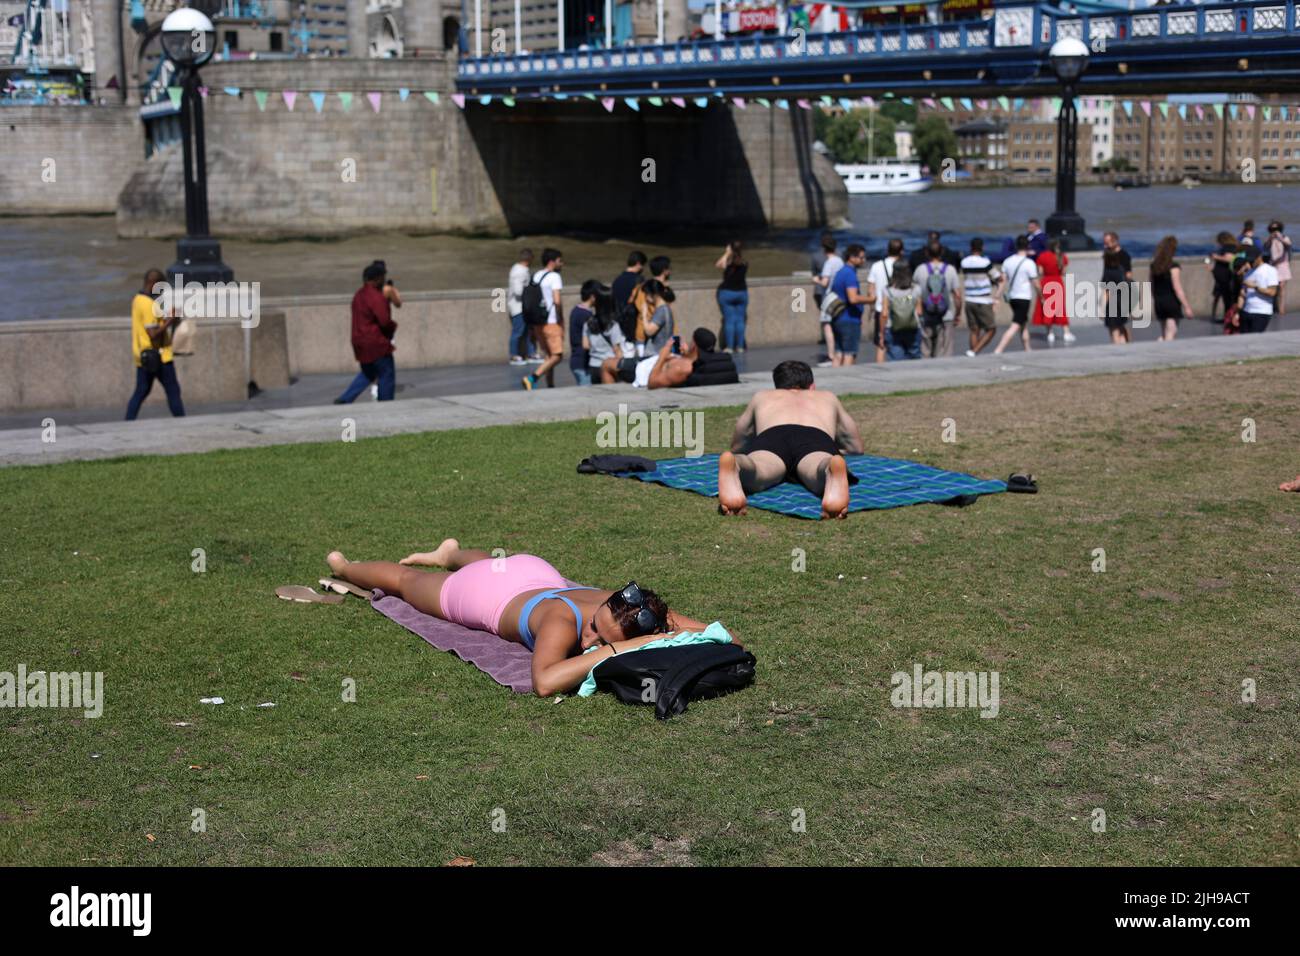 People are seen enjoying the hot weather at London Bridge area. UK is embracing the hottest weather ever due to the impact from climate changes. Temperatures are expected to raise to 40 degrees in London on Monday. The Met Office has issued a red weather alert and warning citizen about the risk of death at extreme hot weather. Stock Photo